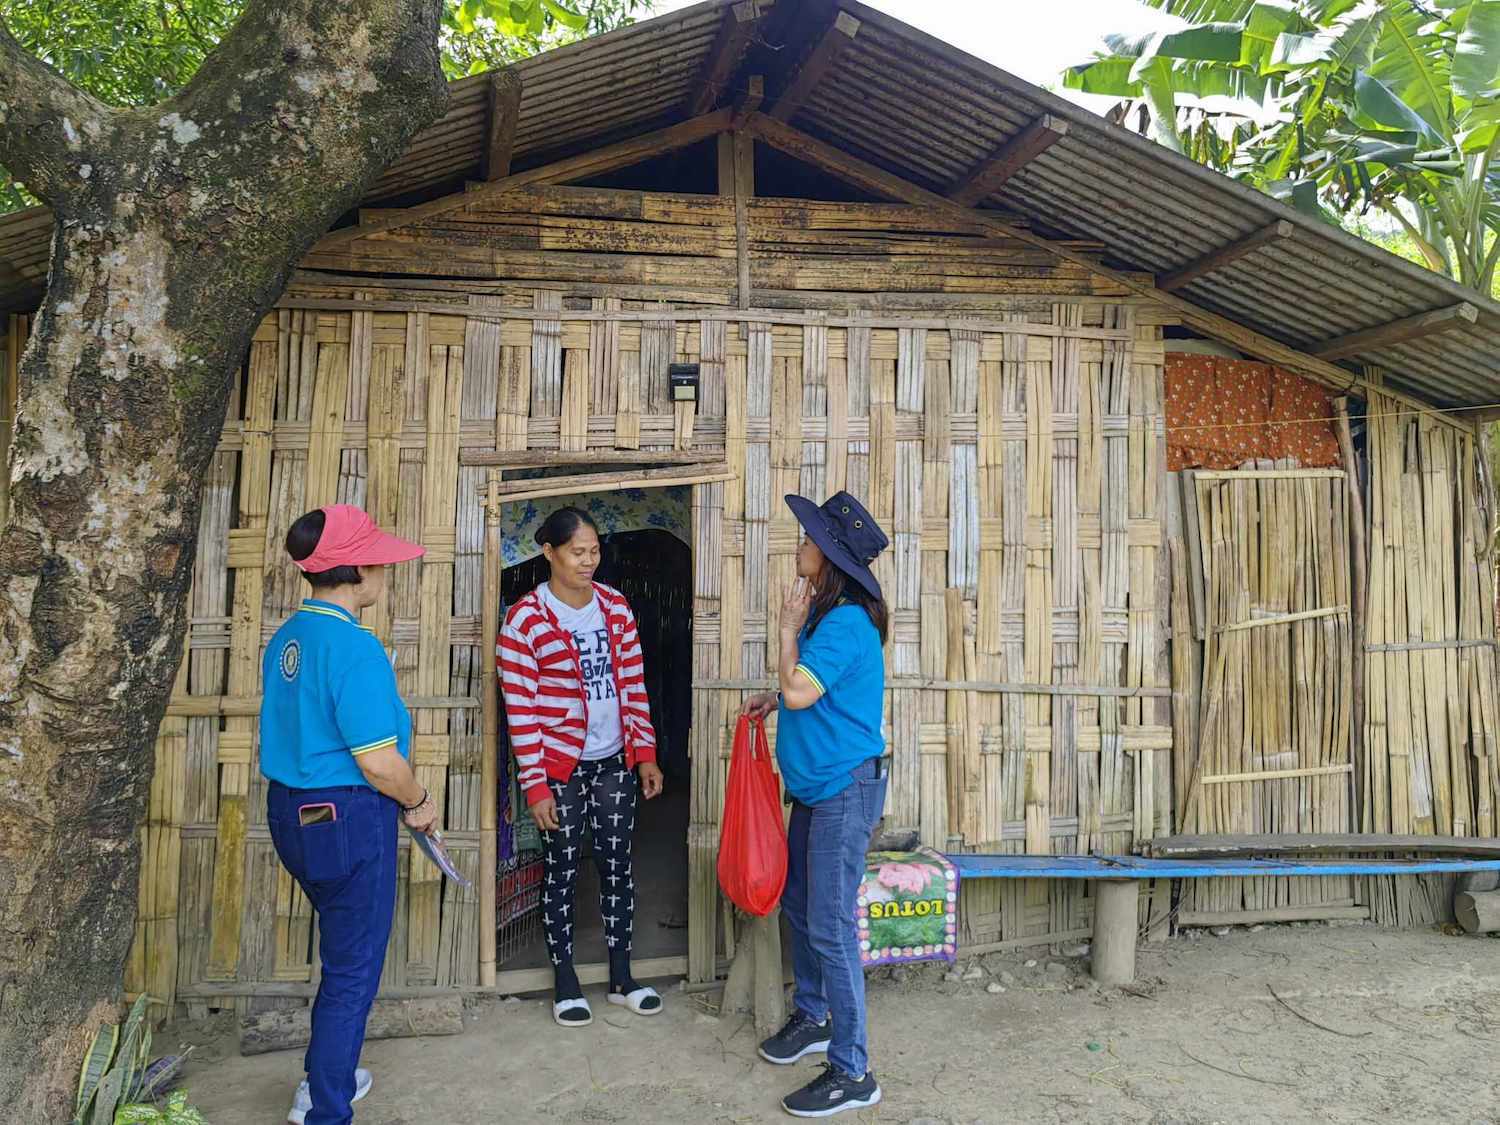 Two individuals in blue uniforms representing the Inner Wheel Club of Central Ortigas are having a conversation with a person in front of a traditional bamboo house.